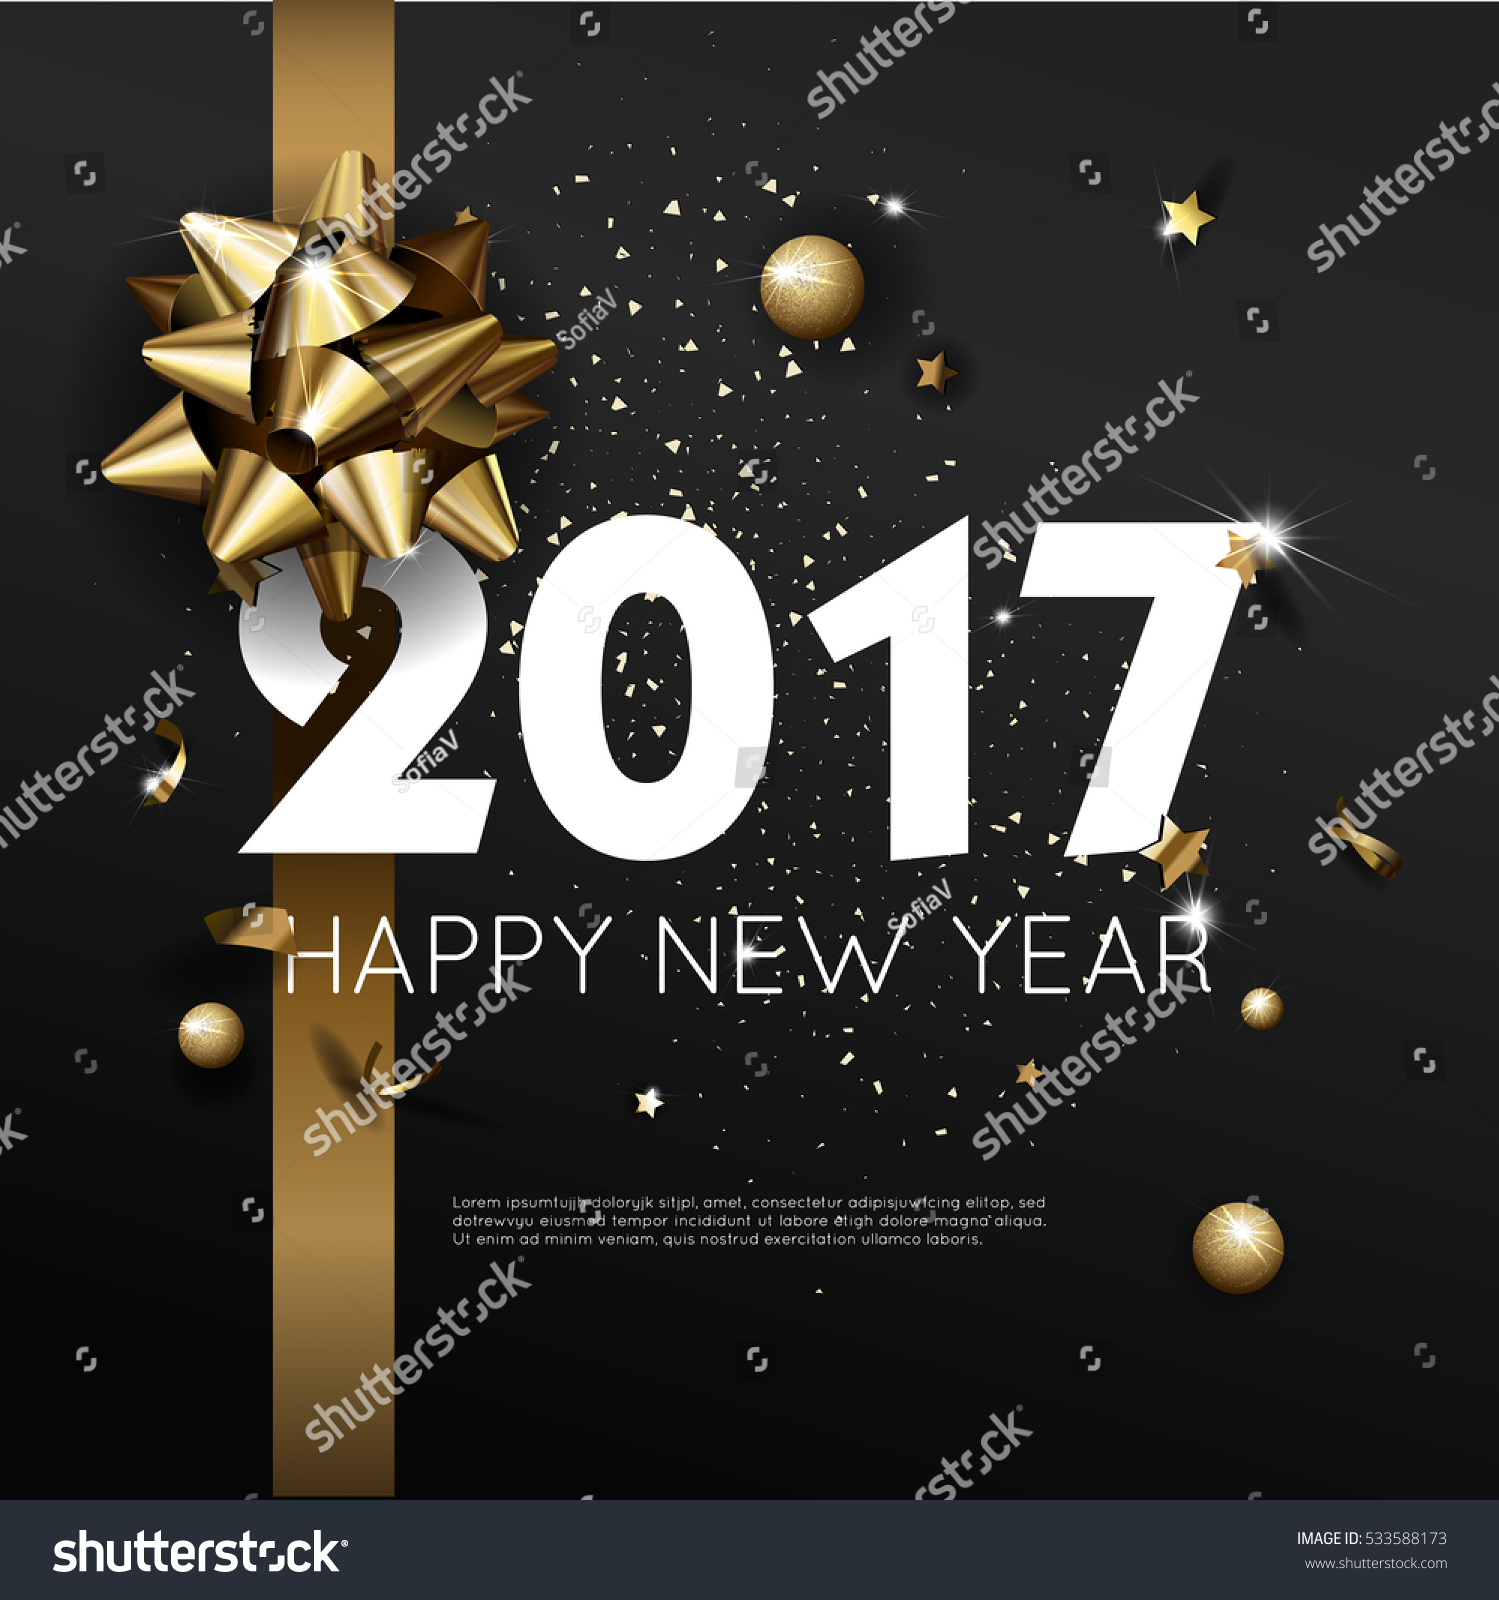 Happy New Year 2017 greeting card or poster template flyer or invitation design. Beautiful luxury holiday background with 3D golden gift bow. Vector Illustration. #533588173